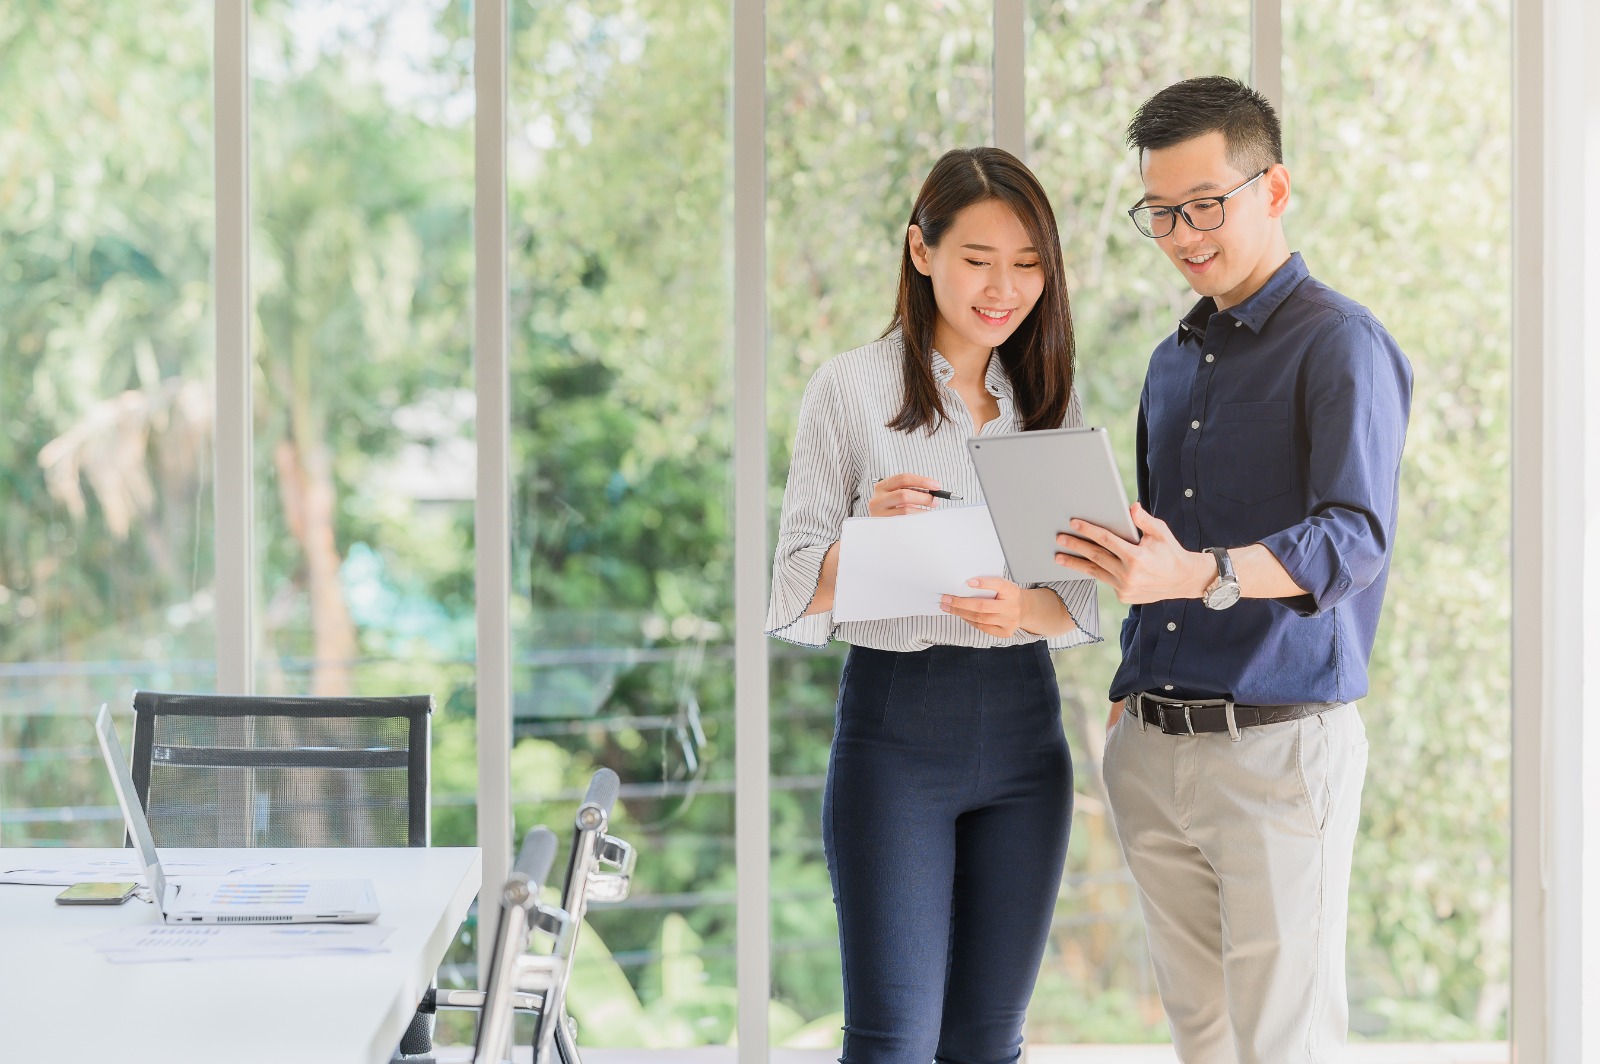 Two people in a brightly lit office space stand next to a conference table, looking at a tablet and holding documents. Their focused conversation highlights the importance of choosing the right trust company for their business in Singapore.